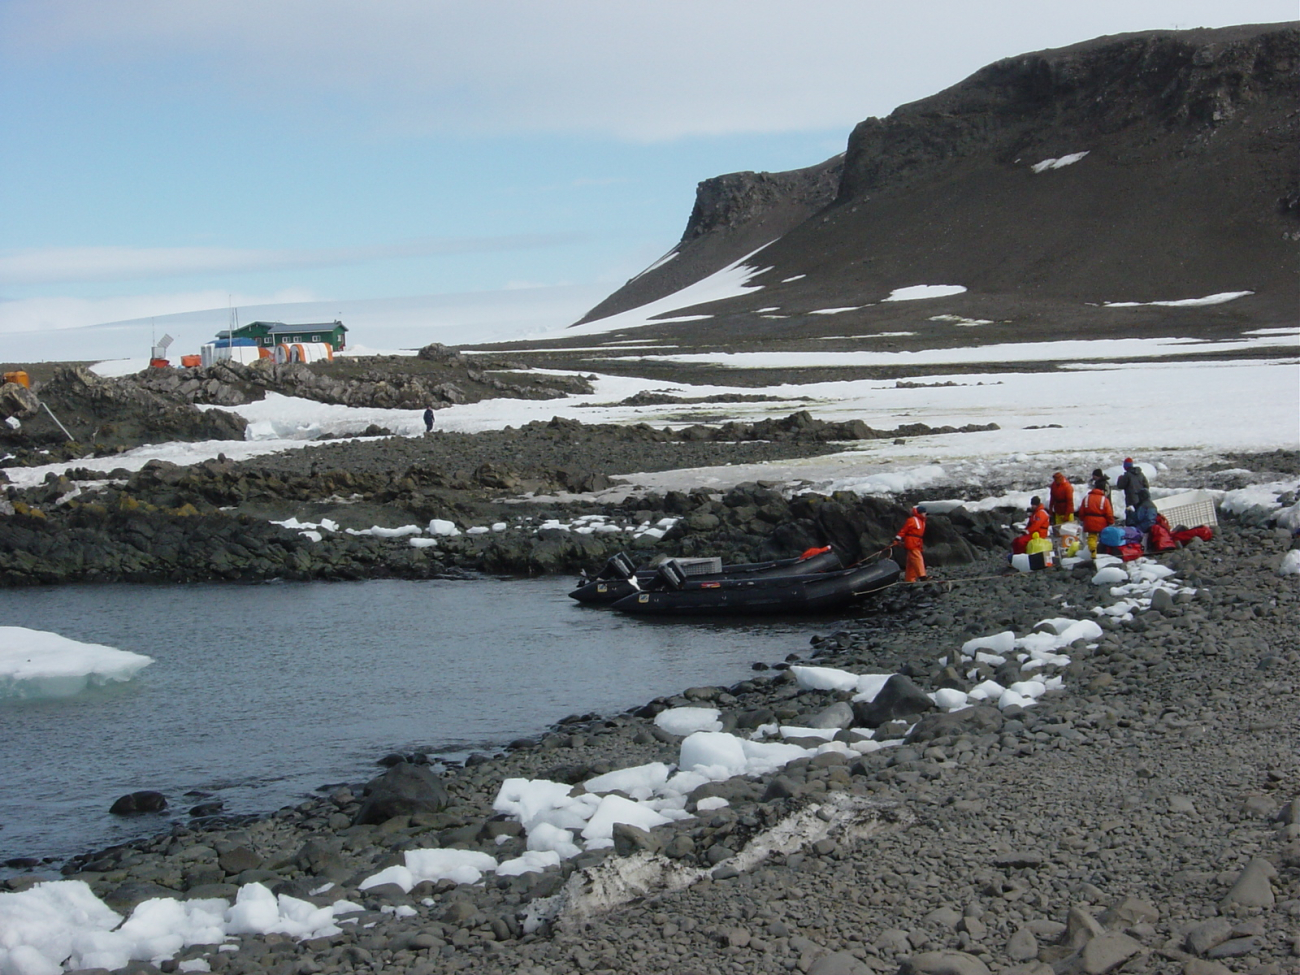 Scientists offload supplies onto the landing beach at Cape Shirreff,Livingston Island